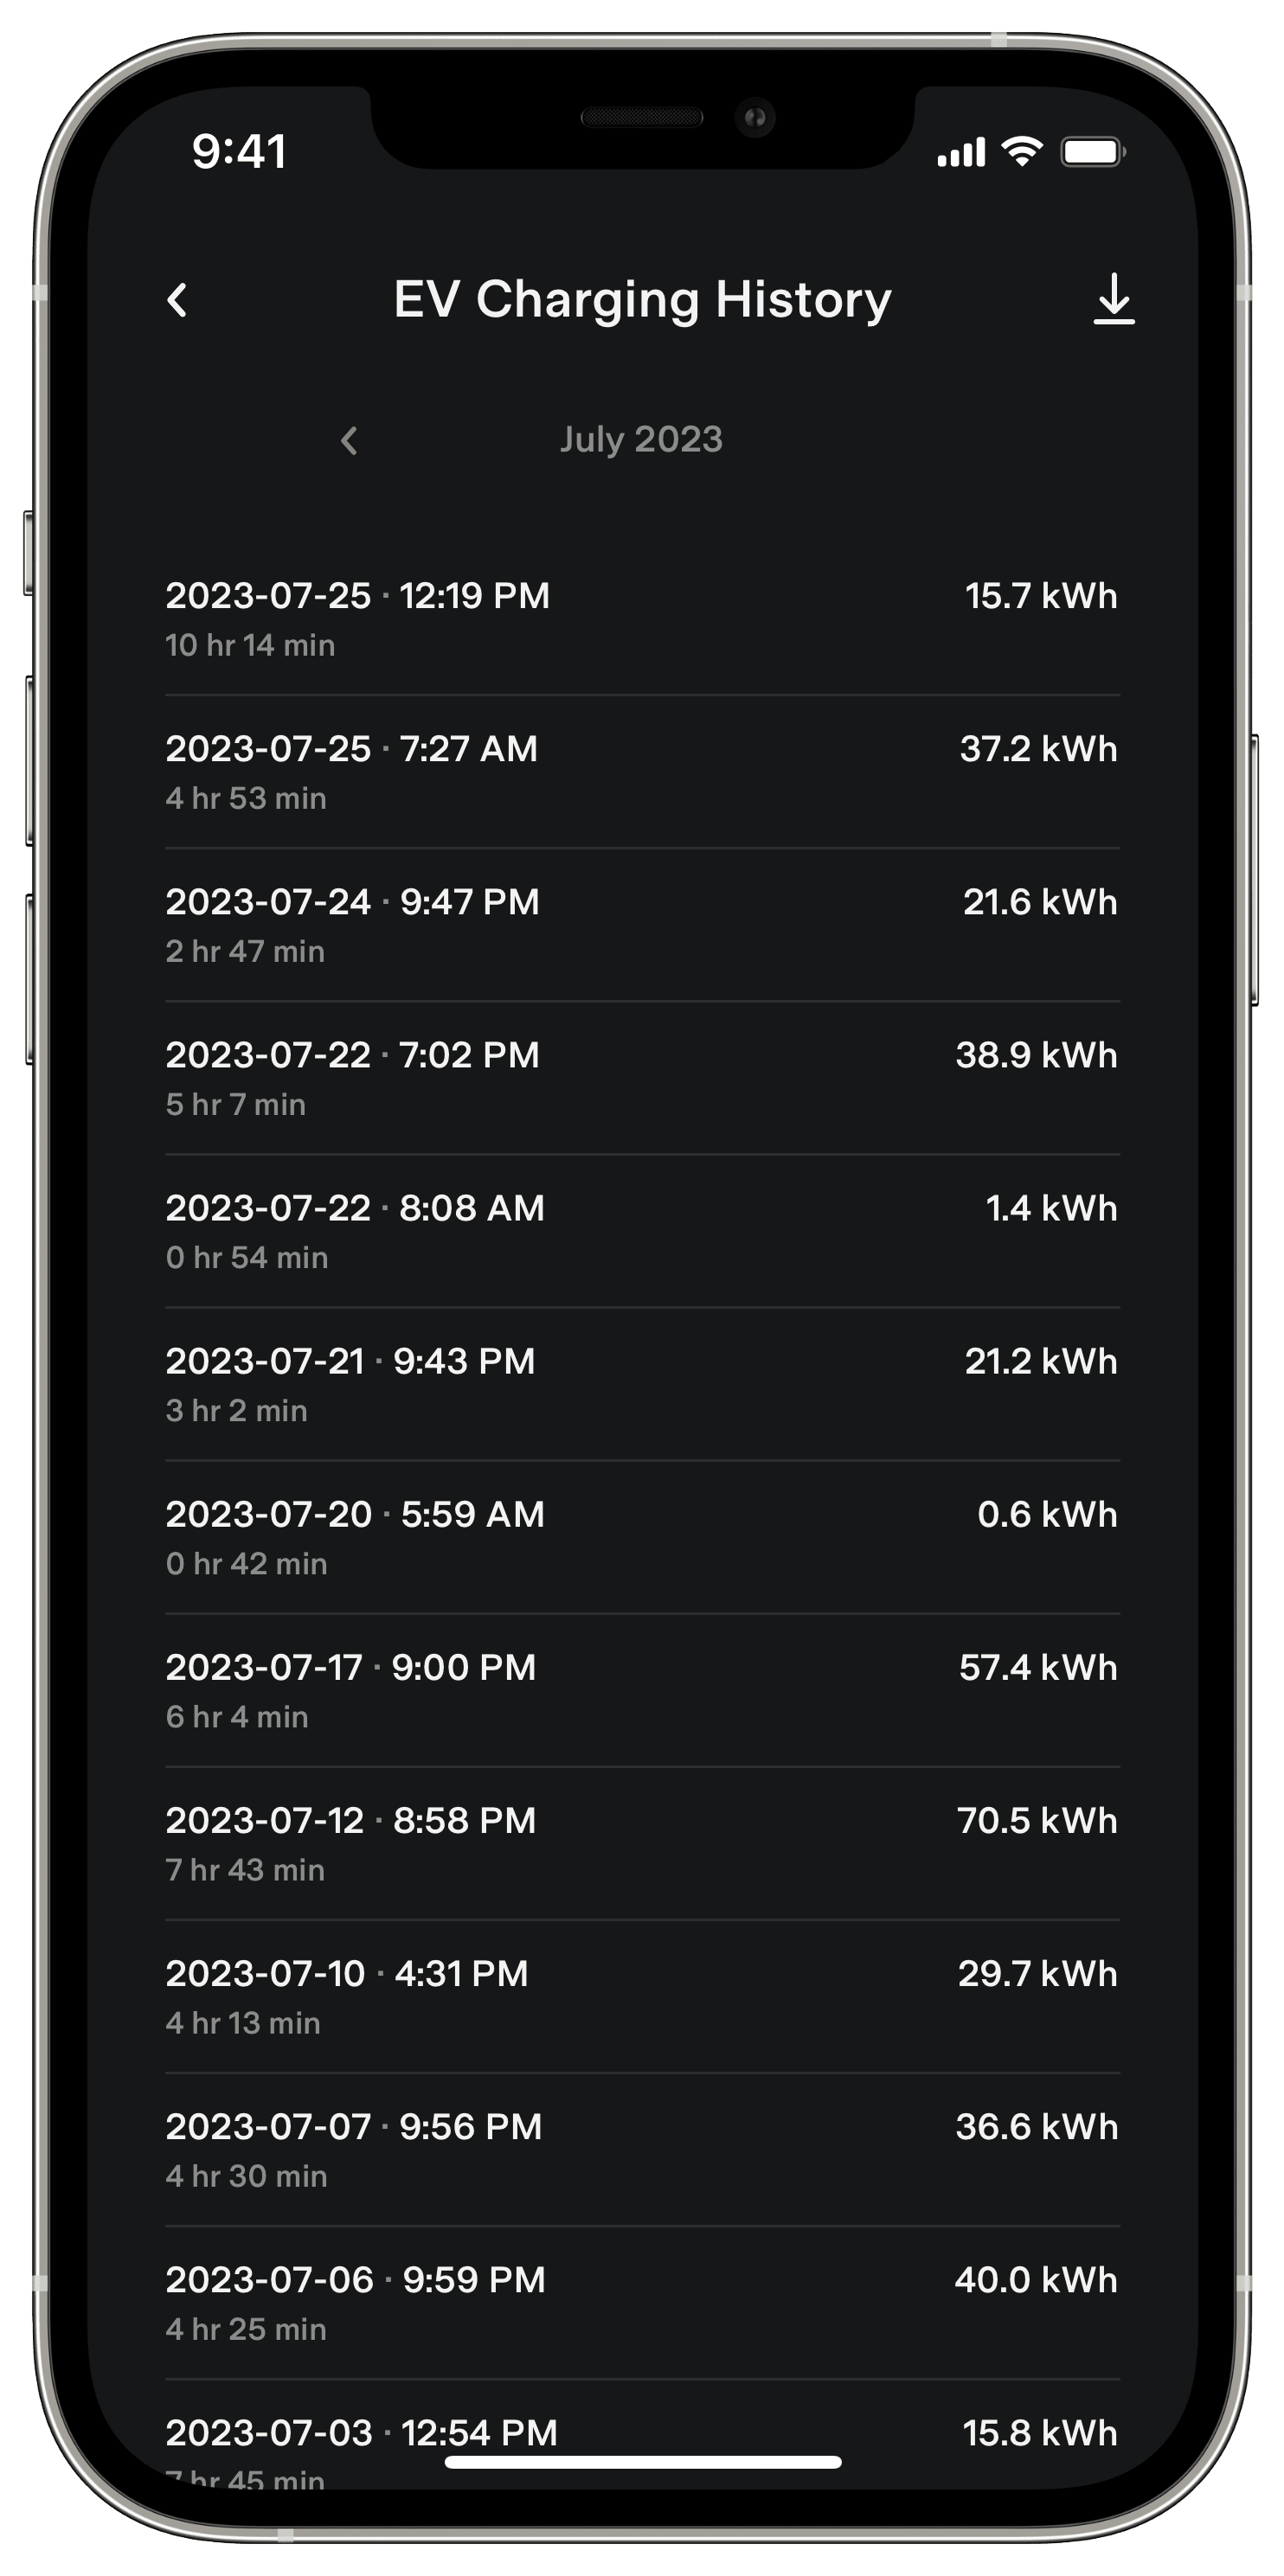 Tesla app displaying the 'EV Charging History' screen that lists several past charging sessions